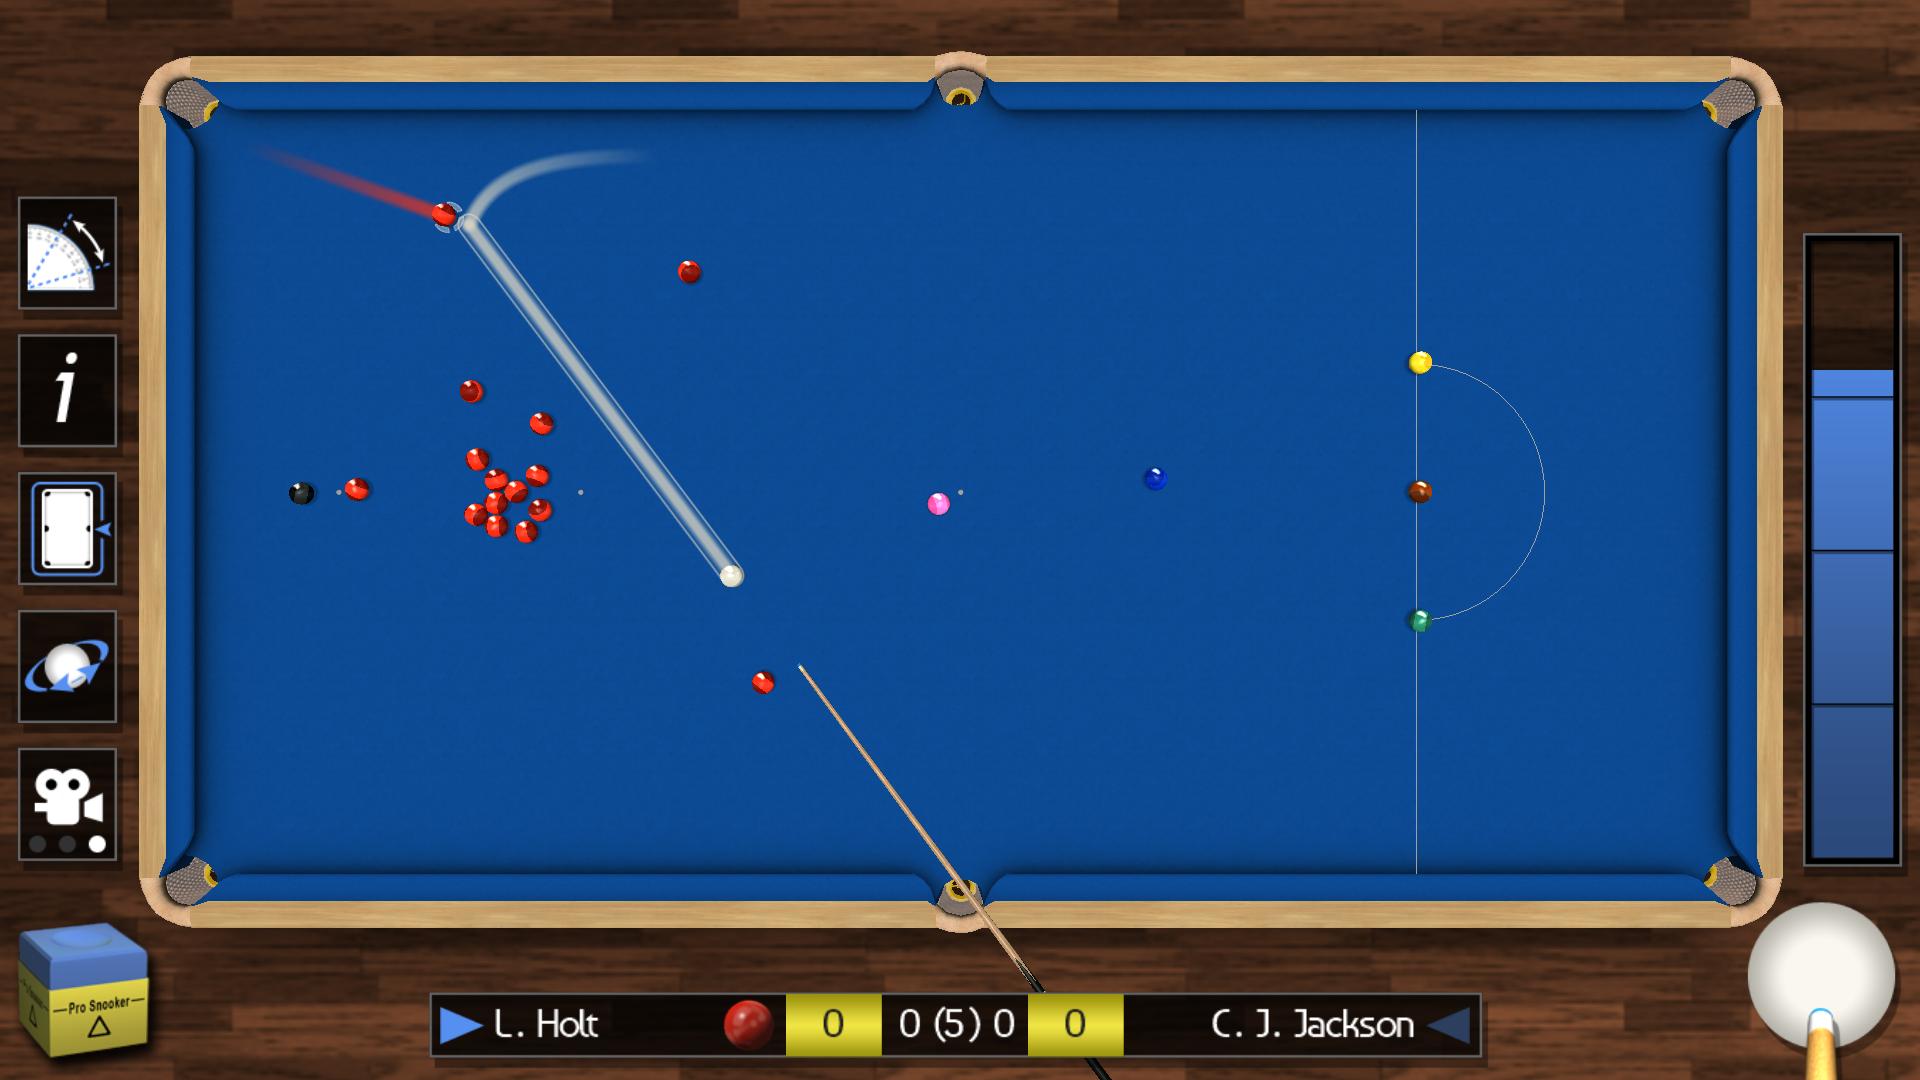 download the new version Pool Challengers 3D